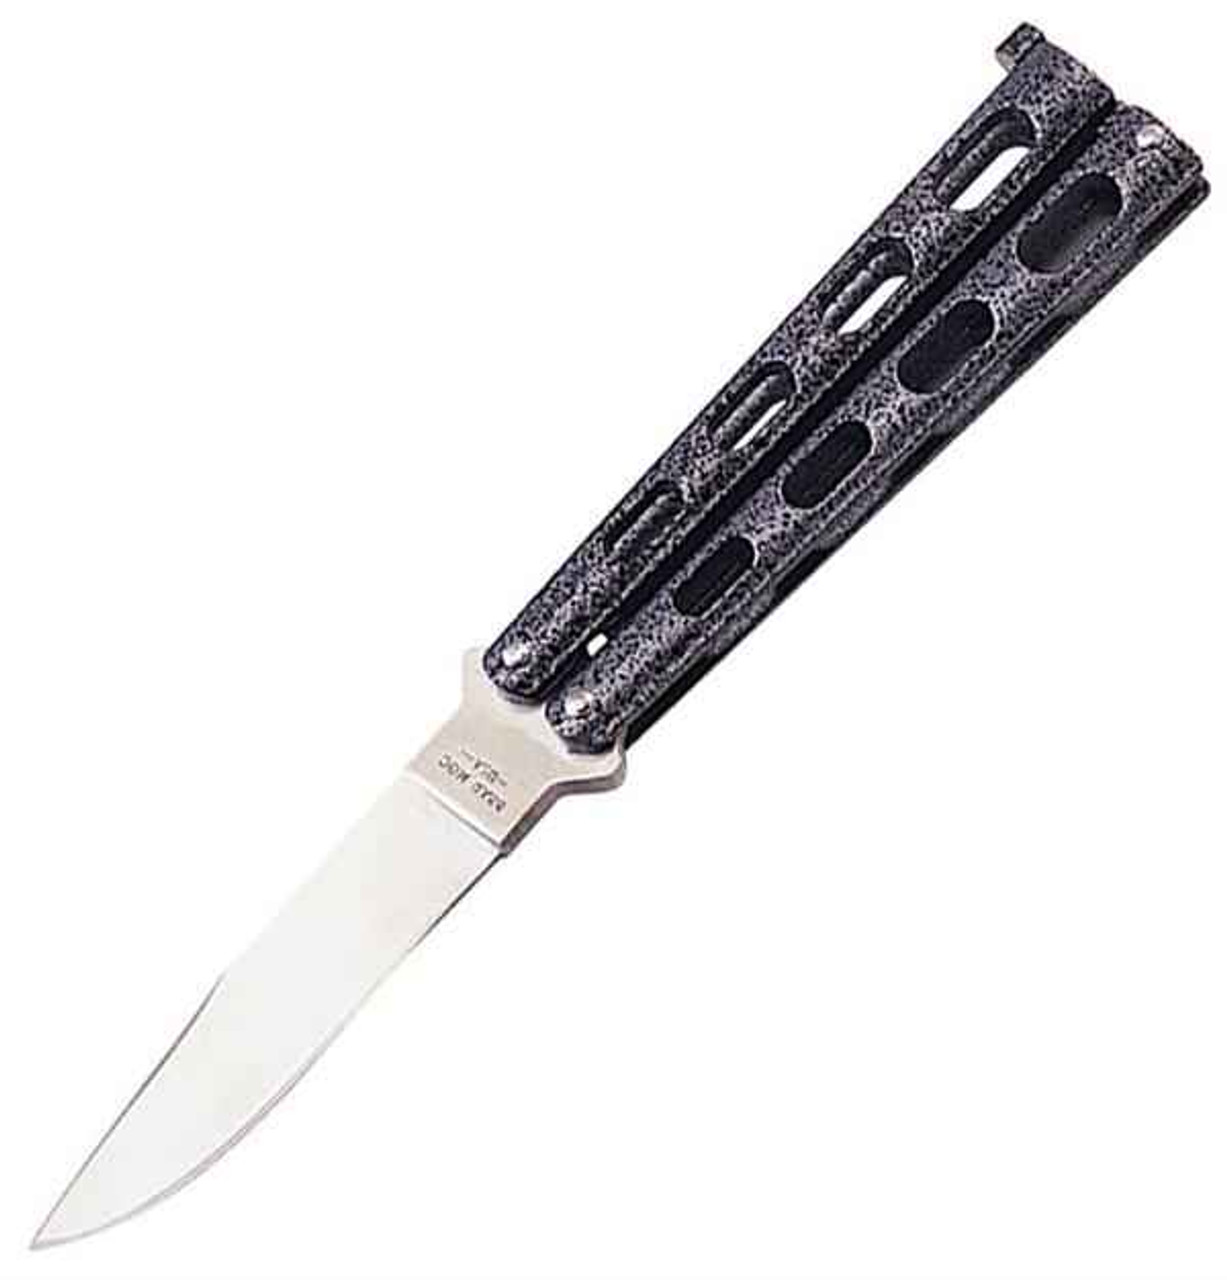 Bear & Son Small Butterfly (BC113) 2.77" 440 Stainless Steel Satin Drop Point Plain Blade, Silver Vein Die Cast Metal Handles